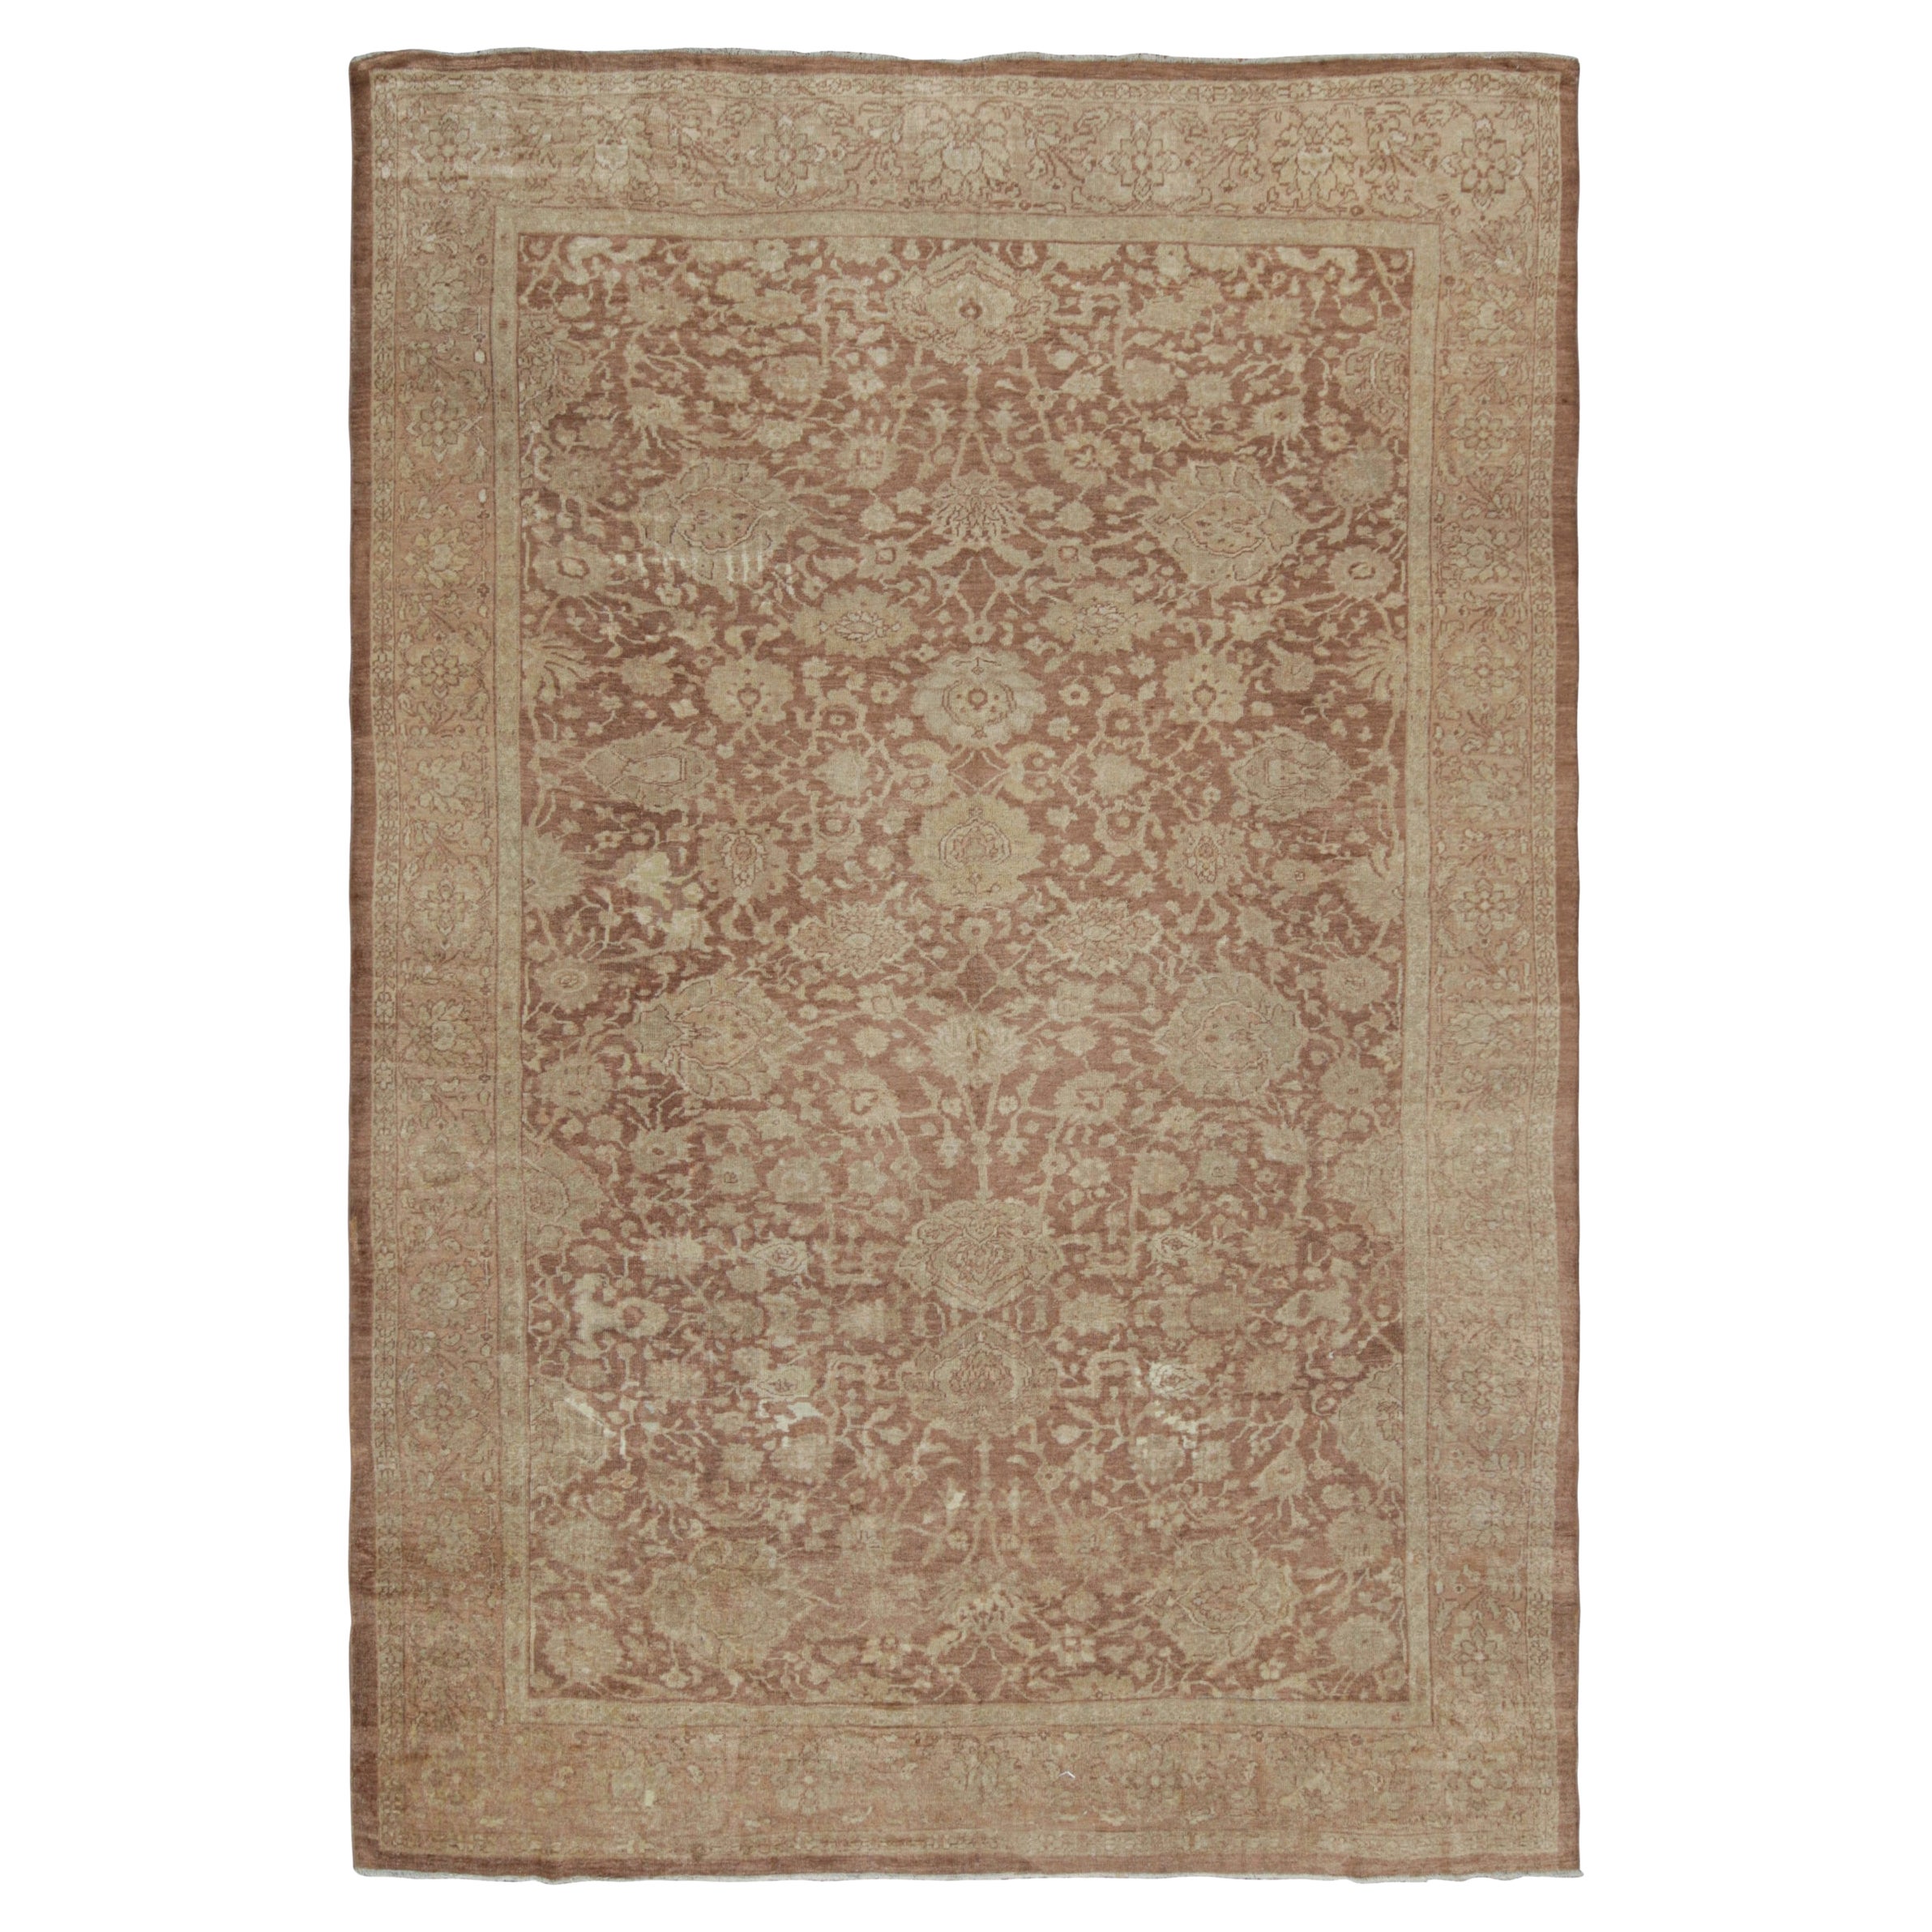 Antique Mahal Persian rug in Beige-Brown Floral Patterns from Rug & Kilim For Sale